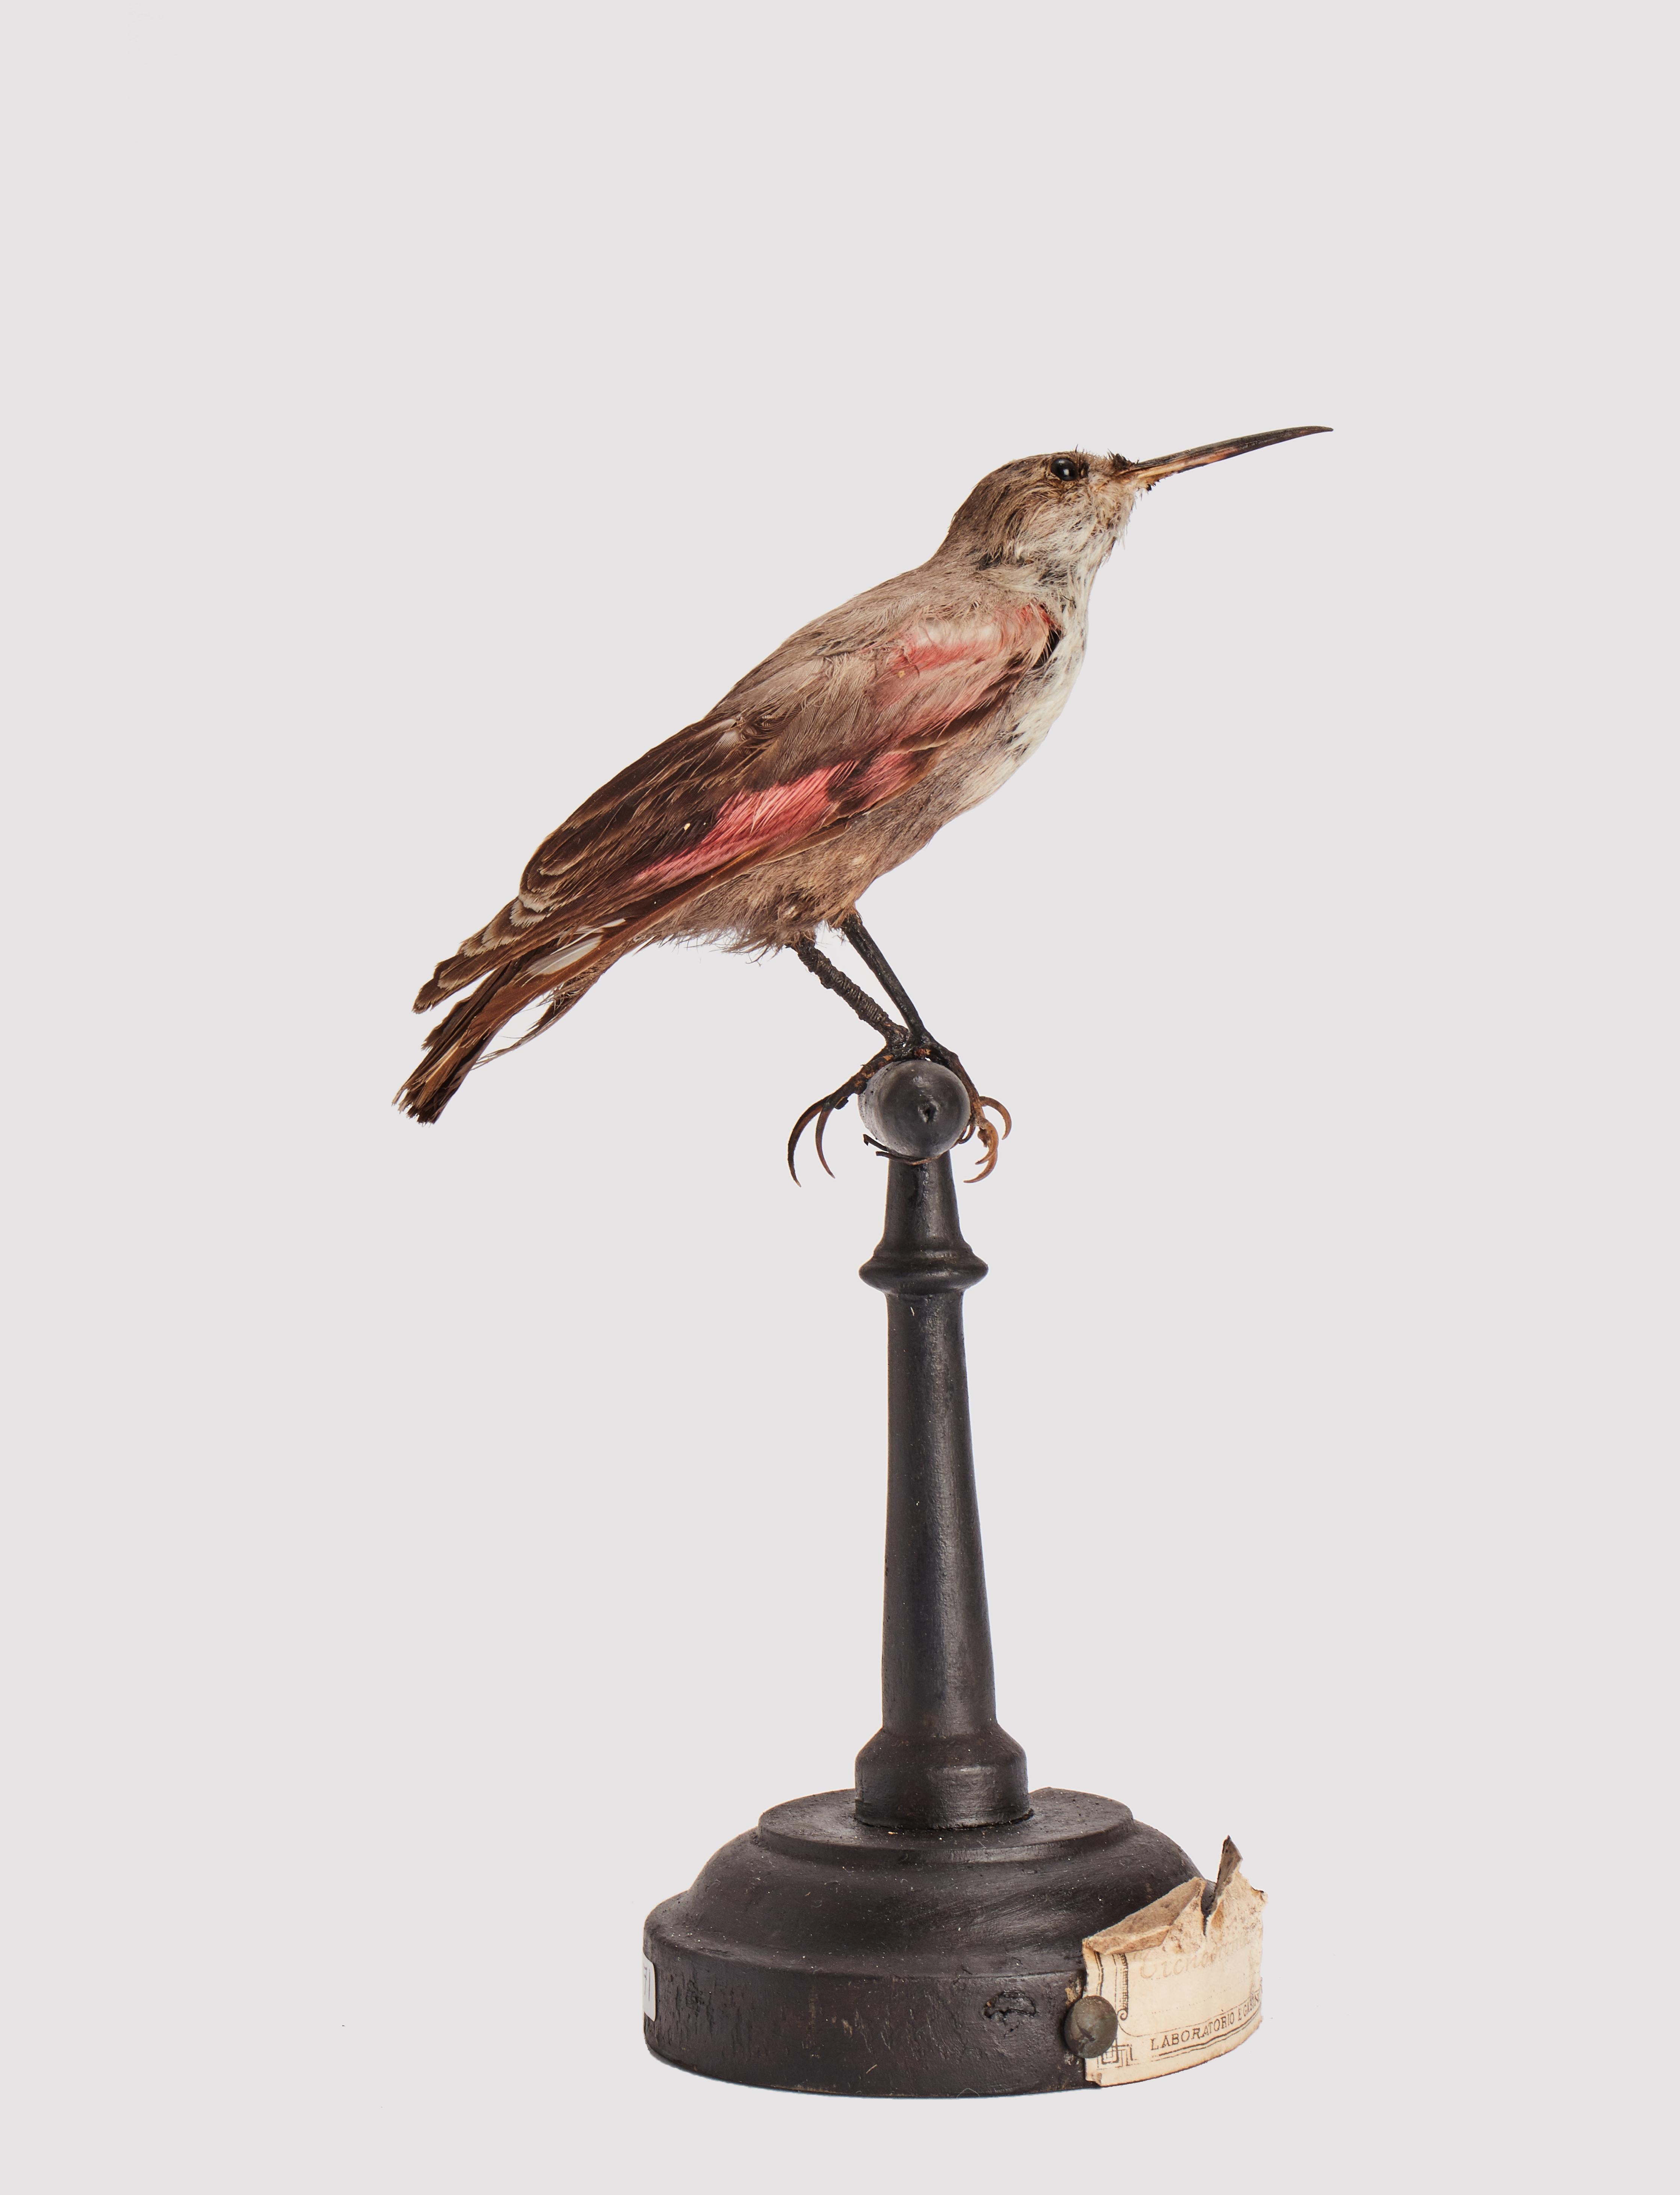 Natural Specimen from Wunderkammer stuffed bird (Tichodroma muraria) Wallcreeper on a fruitwood base painted black, with a paper scroll at the base reading: Specimen for laboratories and Natural History cabinet. S. Brogi Naturalist. Siena, Italy